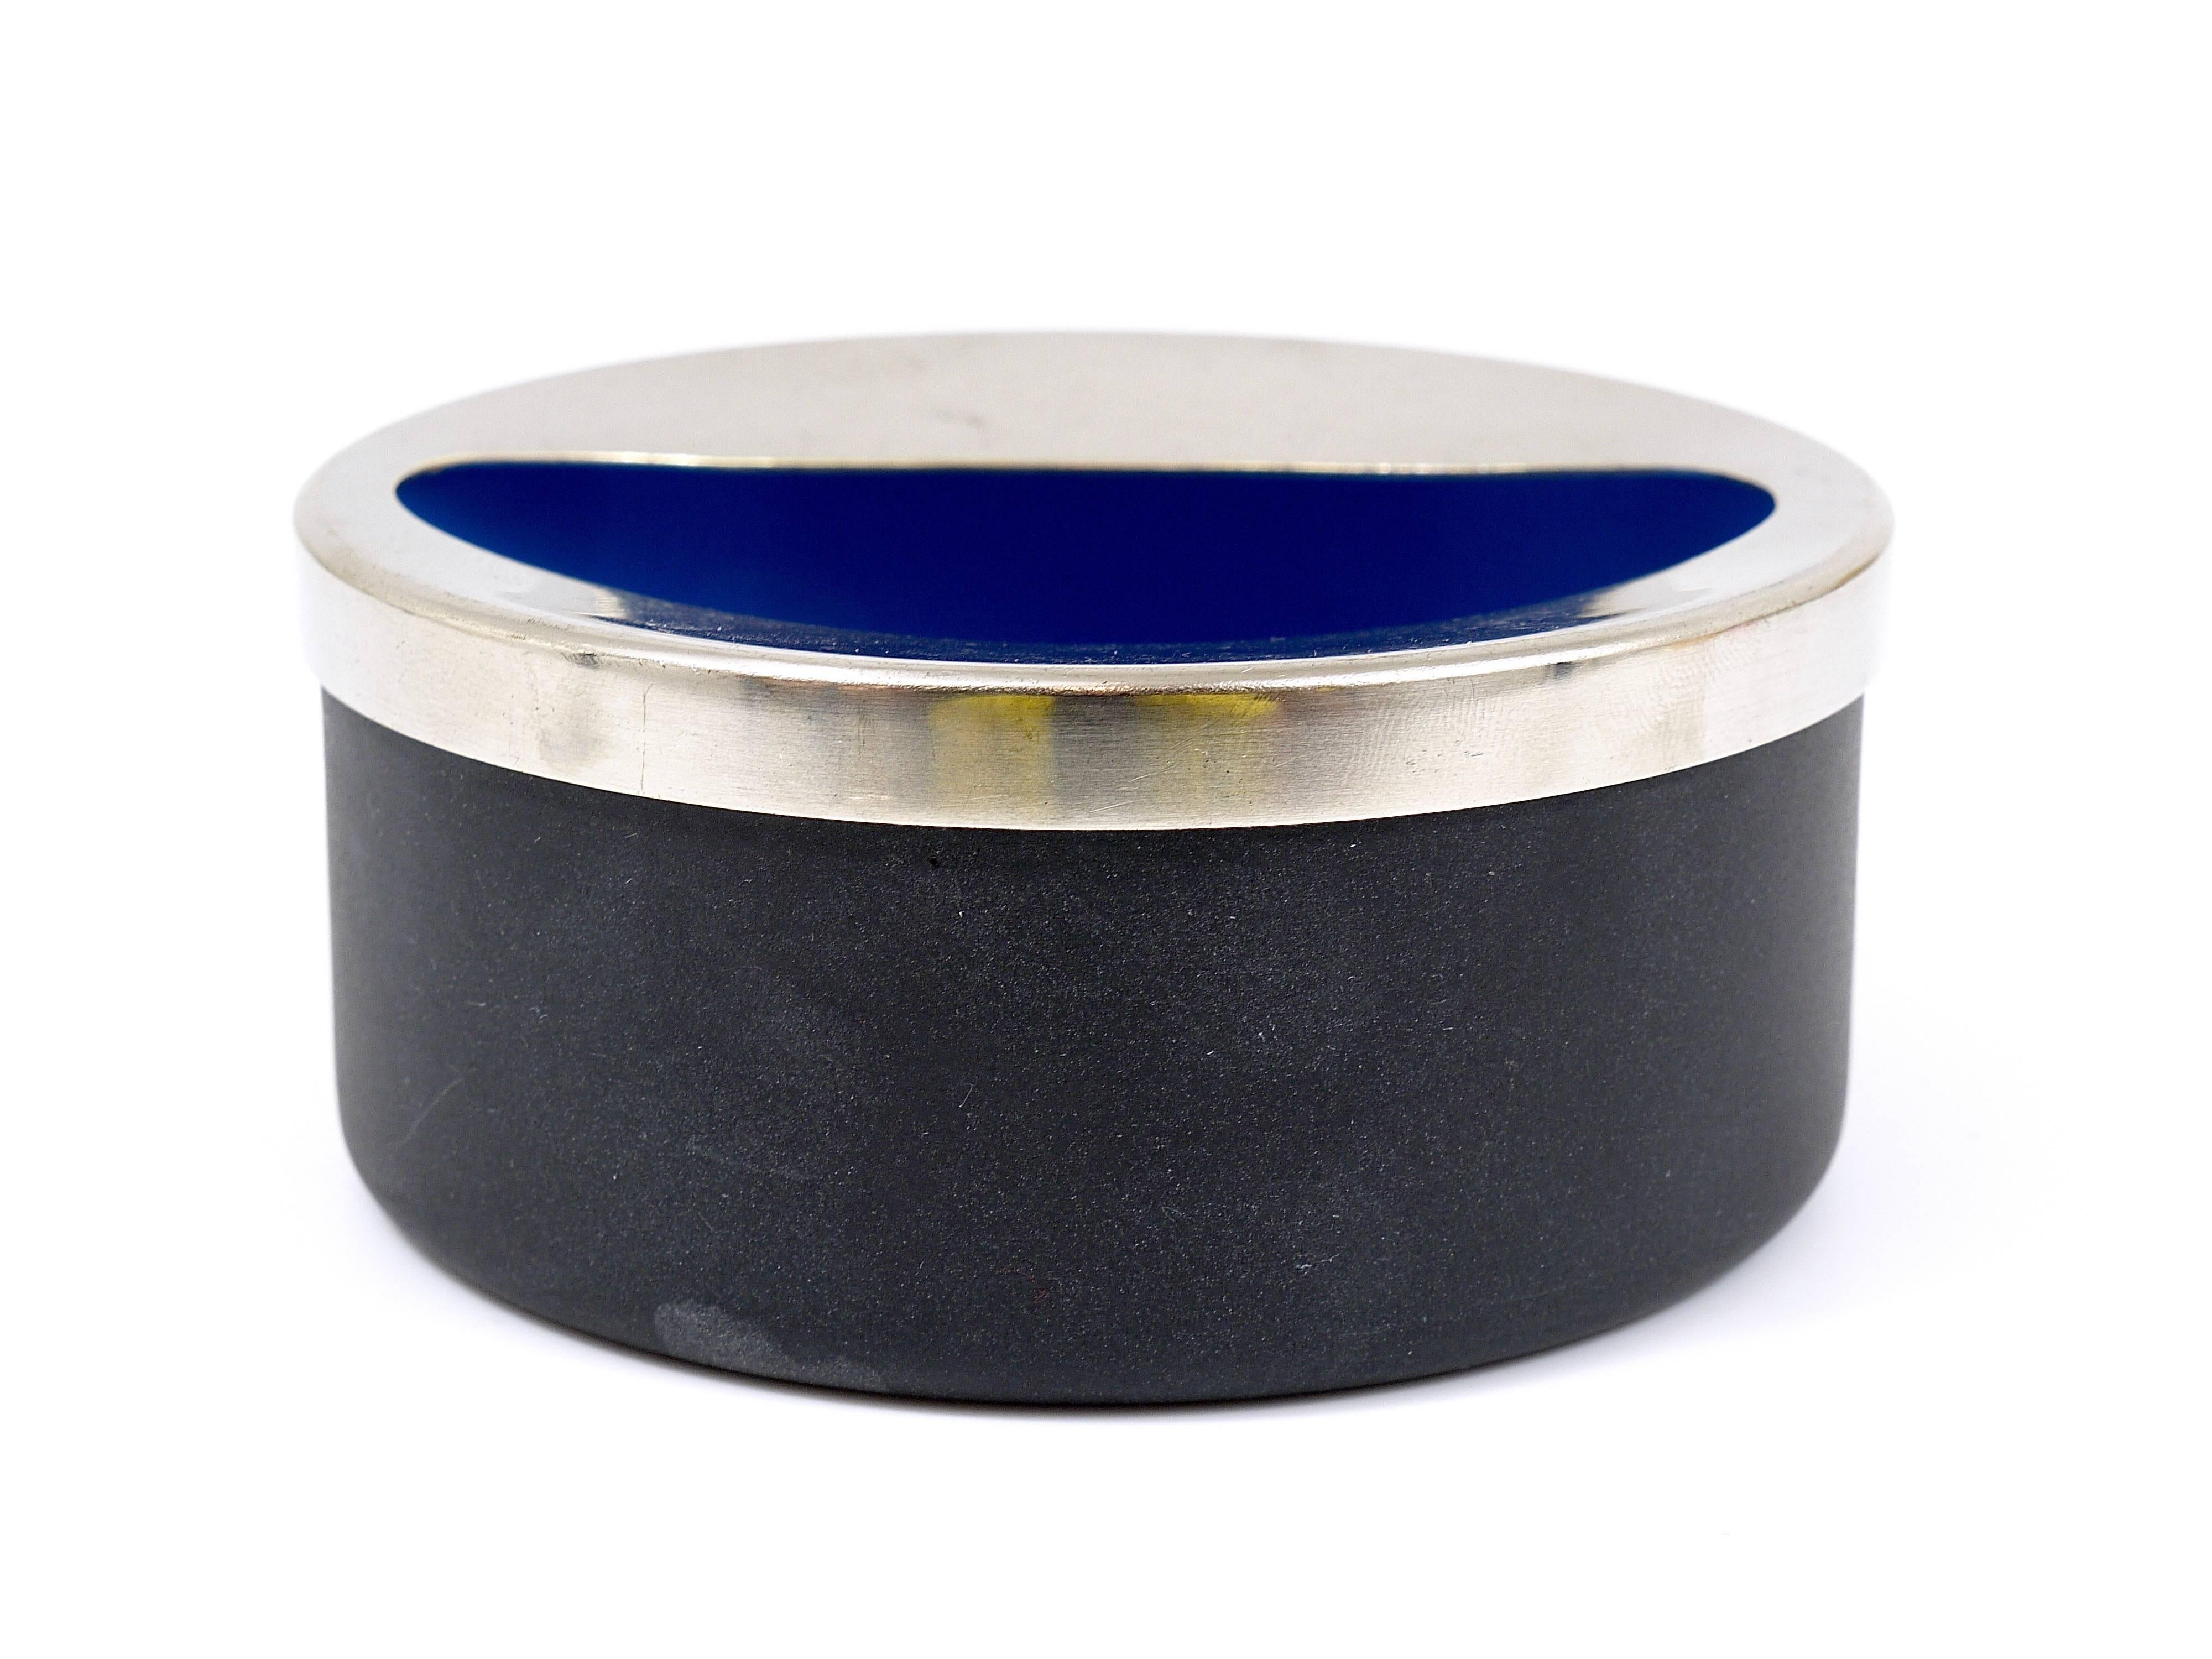 A beautiful modernist vintage ashtray made of enameled steel from the 1960s. Designed by Carl Aubock, Austria. matte black with a blue glossy interior and a stainless steel lid. In good condition with charming patina.